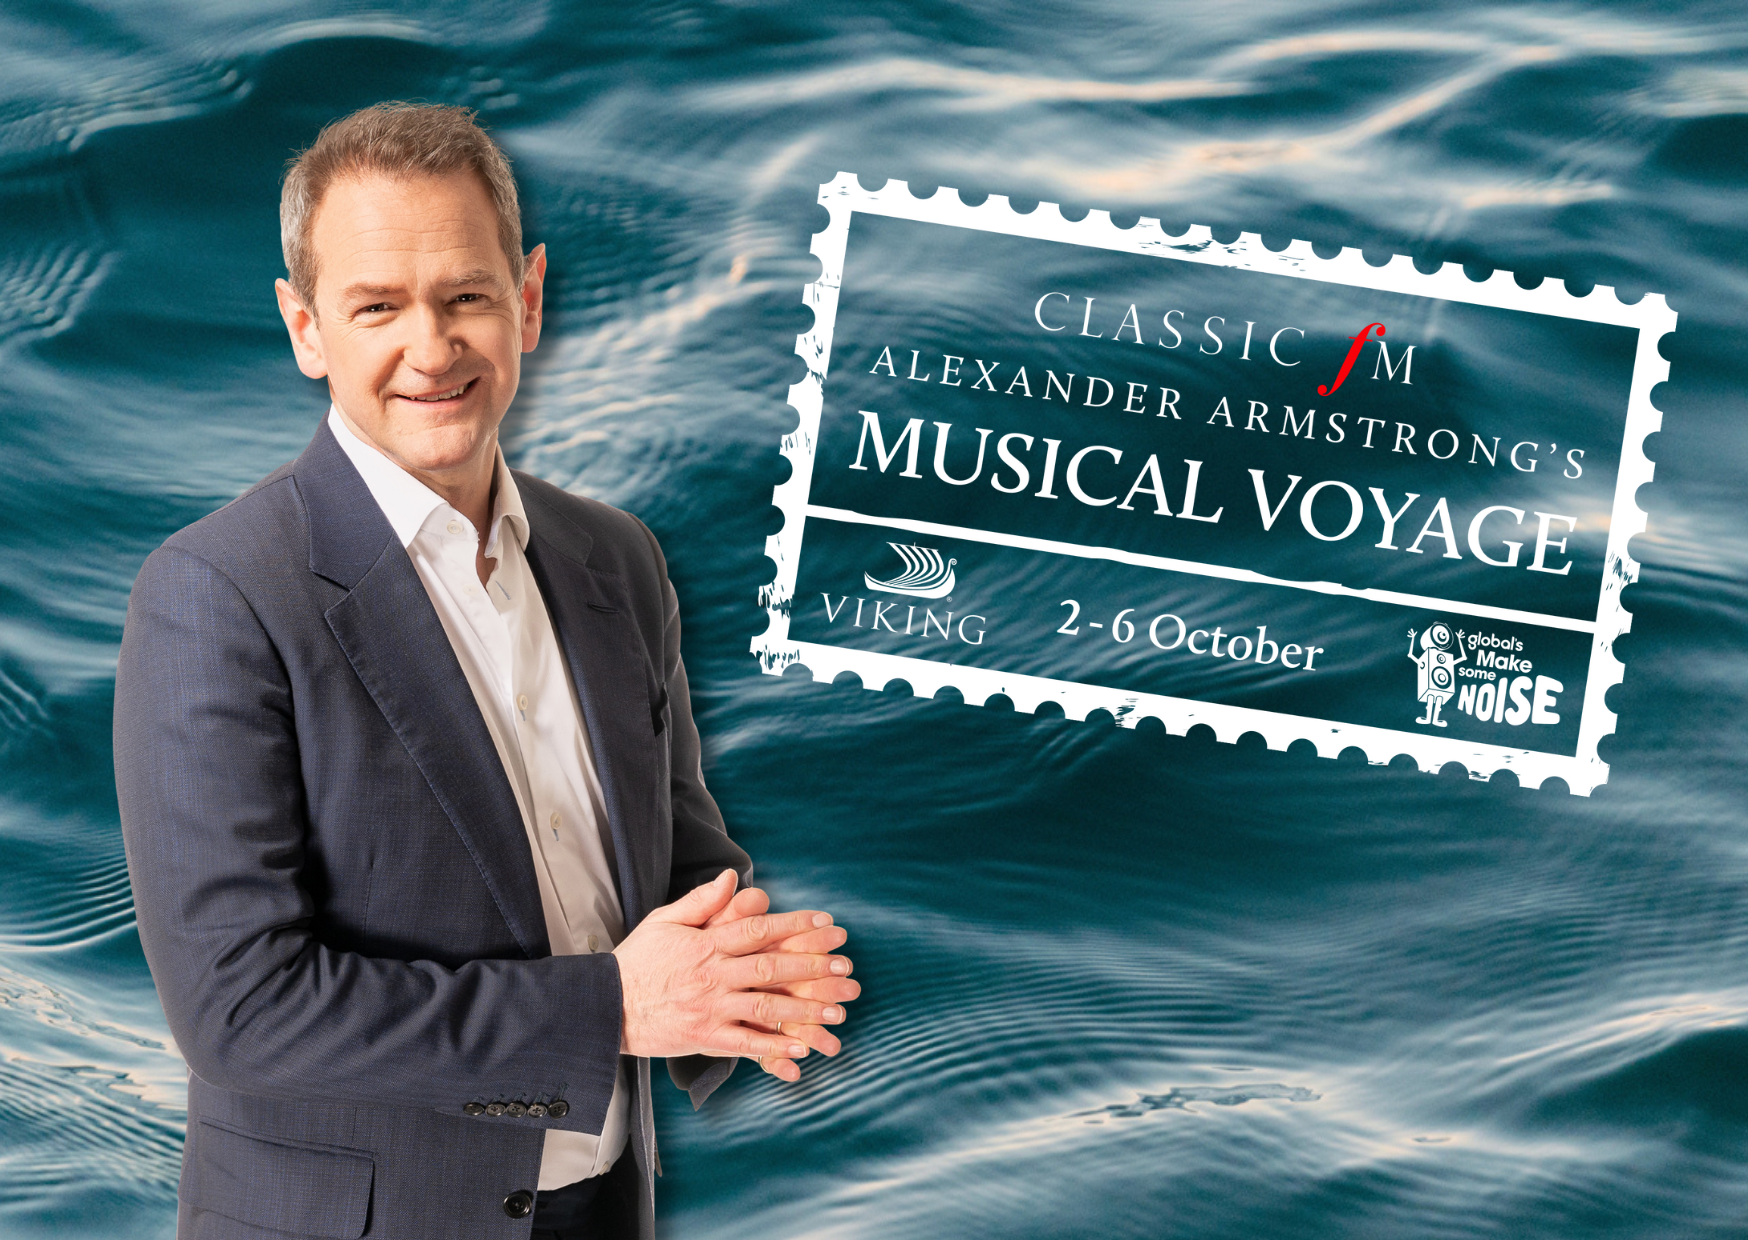 Alexander Armstrong embarks on a Musical Voyage charity challenge for Global’s Make Some Noise!